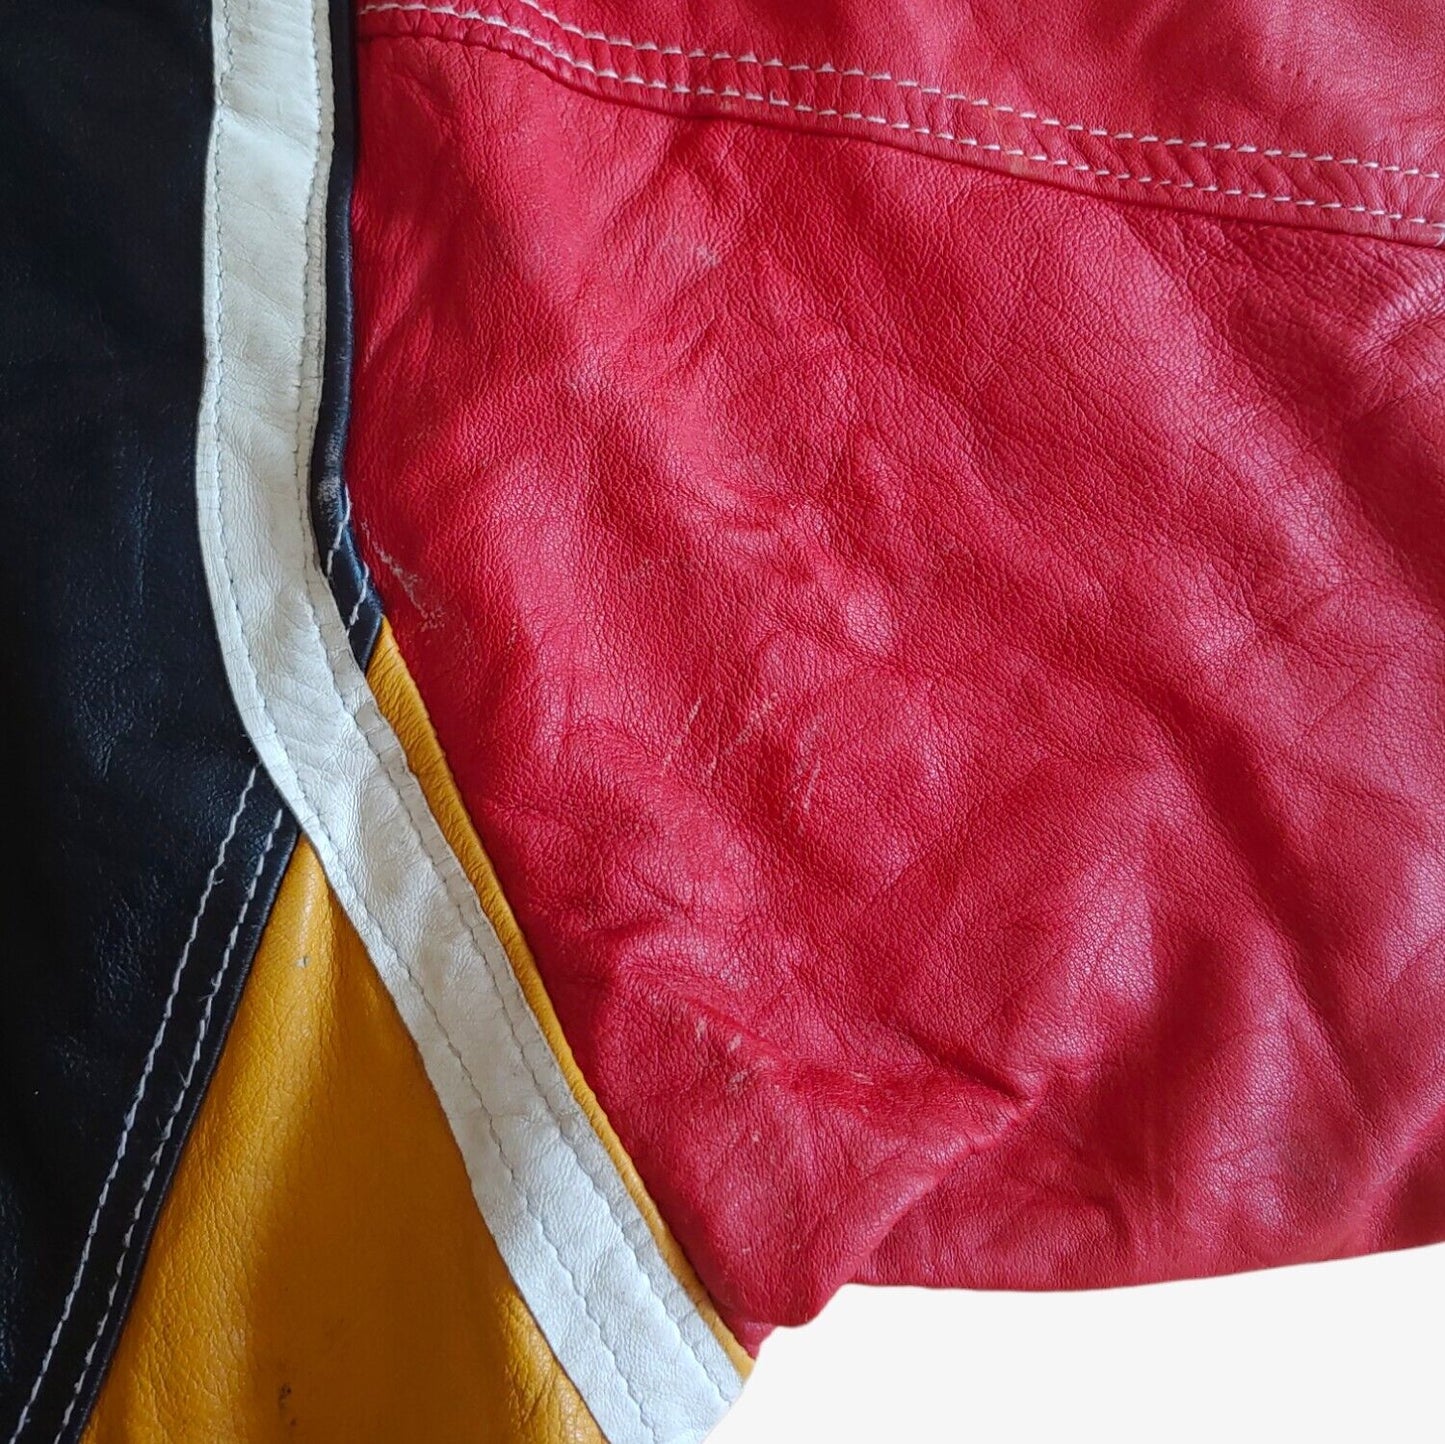 Vintage 90s Baseball Embroidered Spell Out Colourful Leather Varsity Jacket With Big Back Motif Mark - Casspios Dream